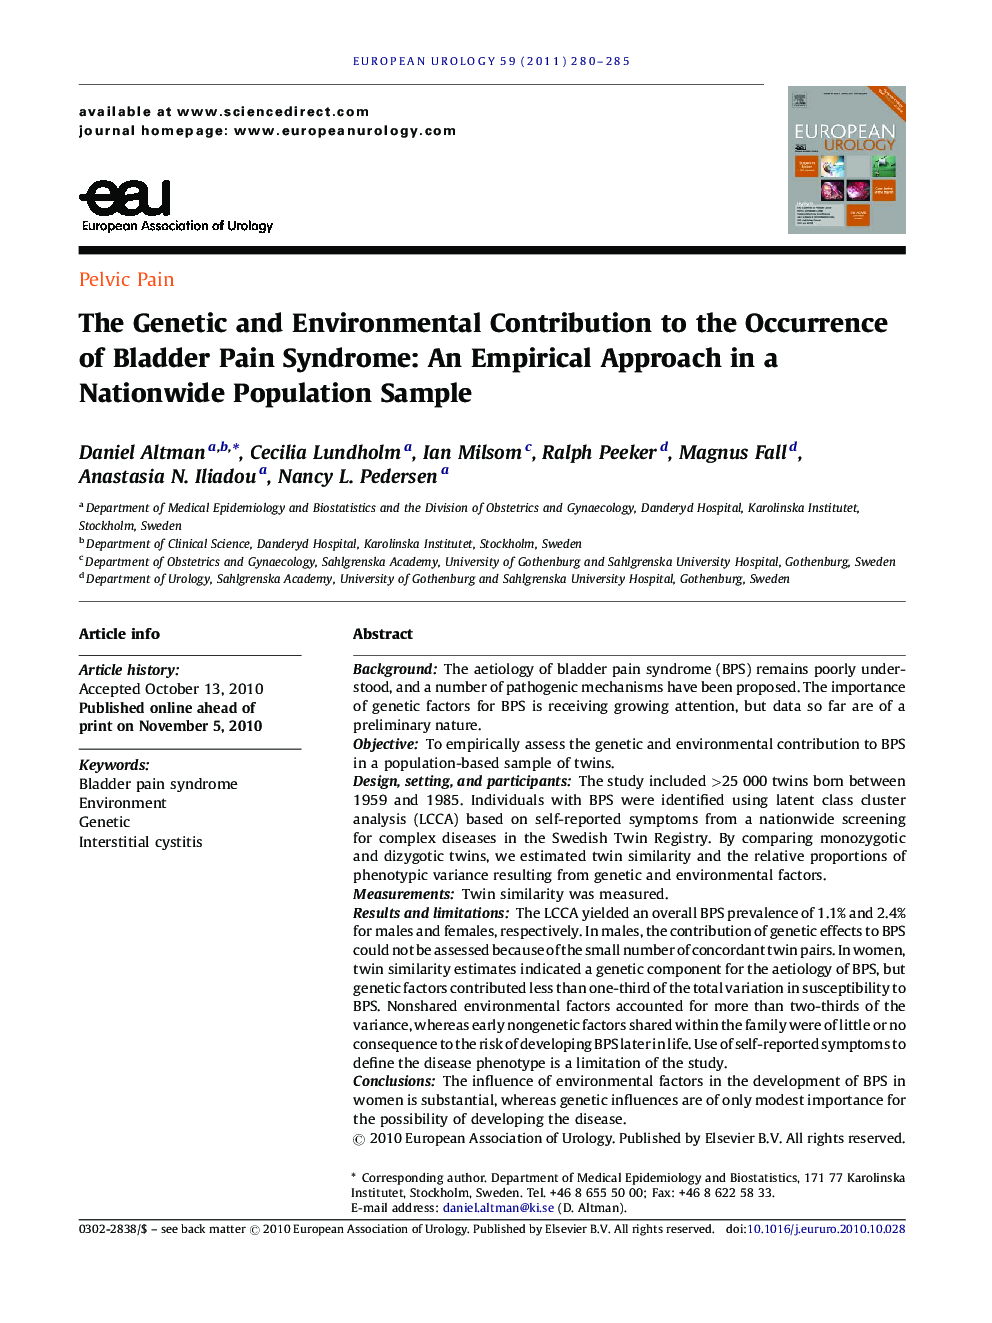 The Genetic and Environmental Contribution to the Occurrence of Bladder Pain Syndrome: An Empirical Approach in a Nationwide Population Sample